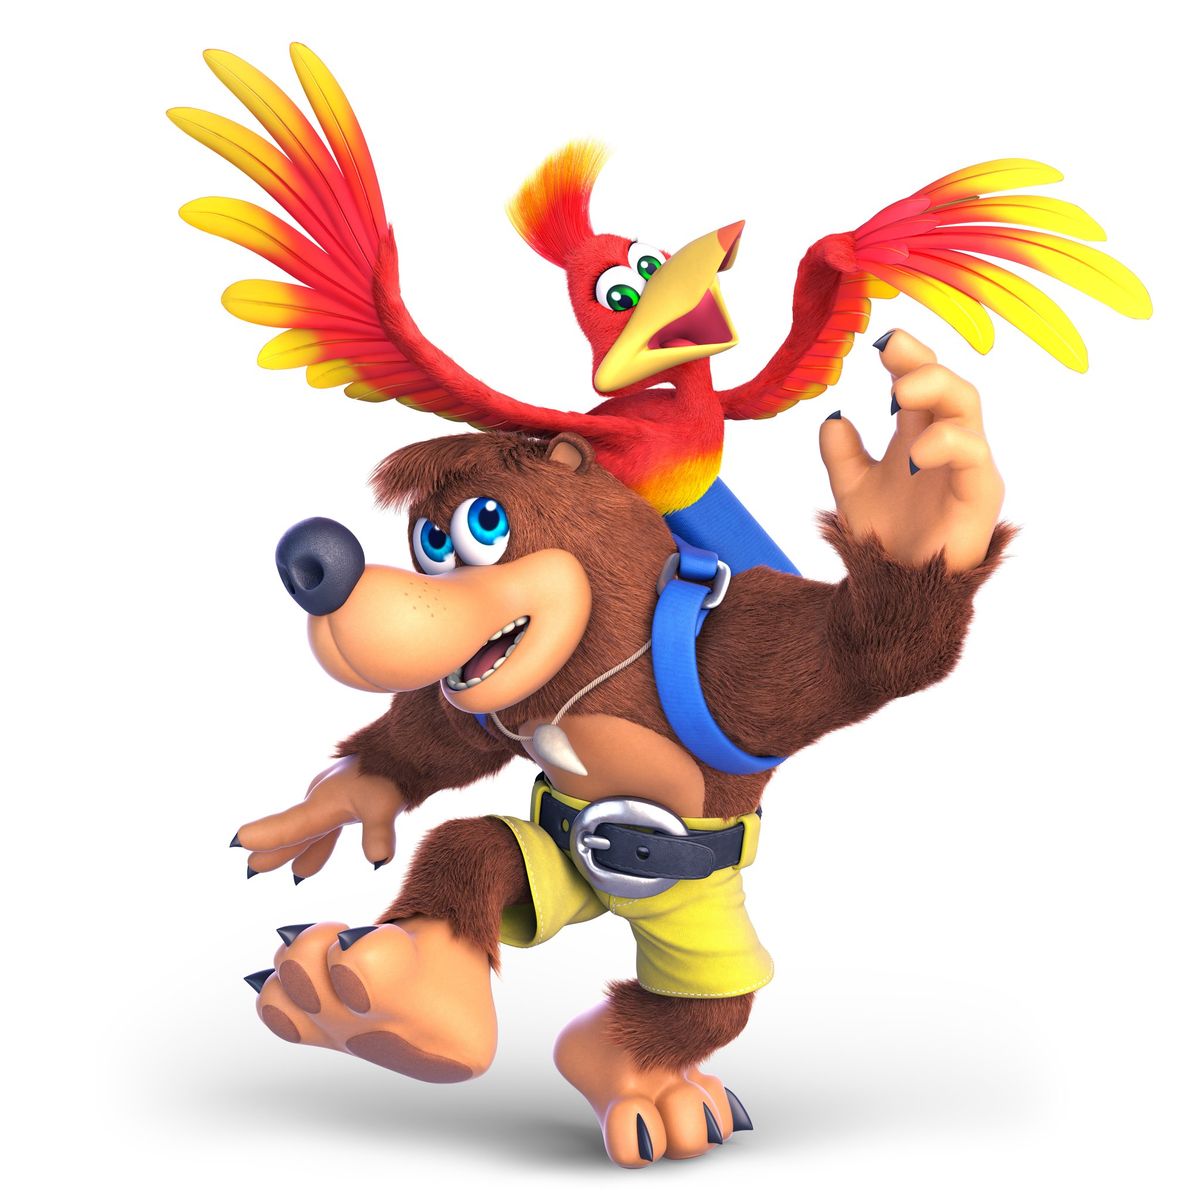 How to counter Banjo And Kazooie with Cloud in Super Smash Bros. Ultimate